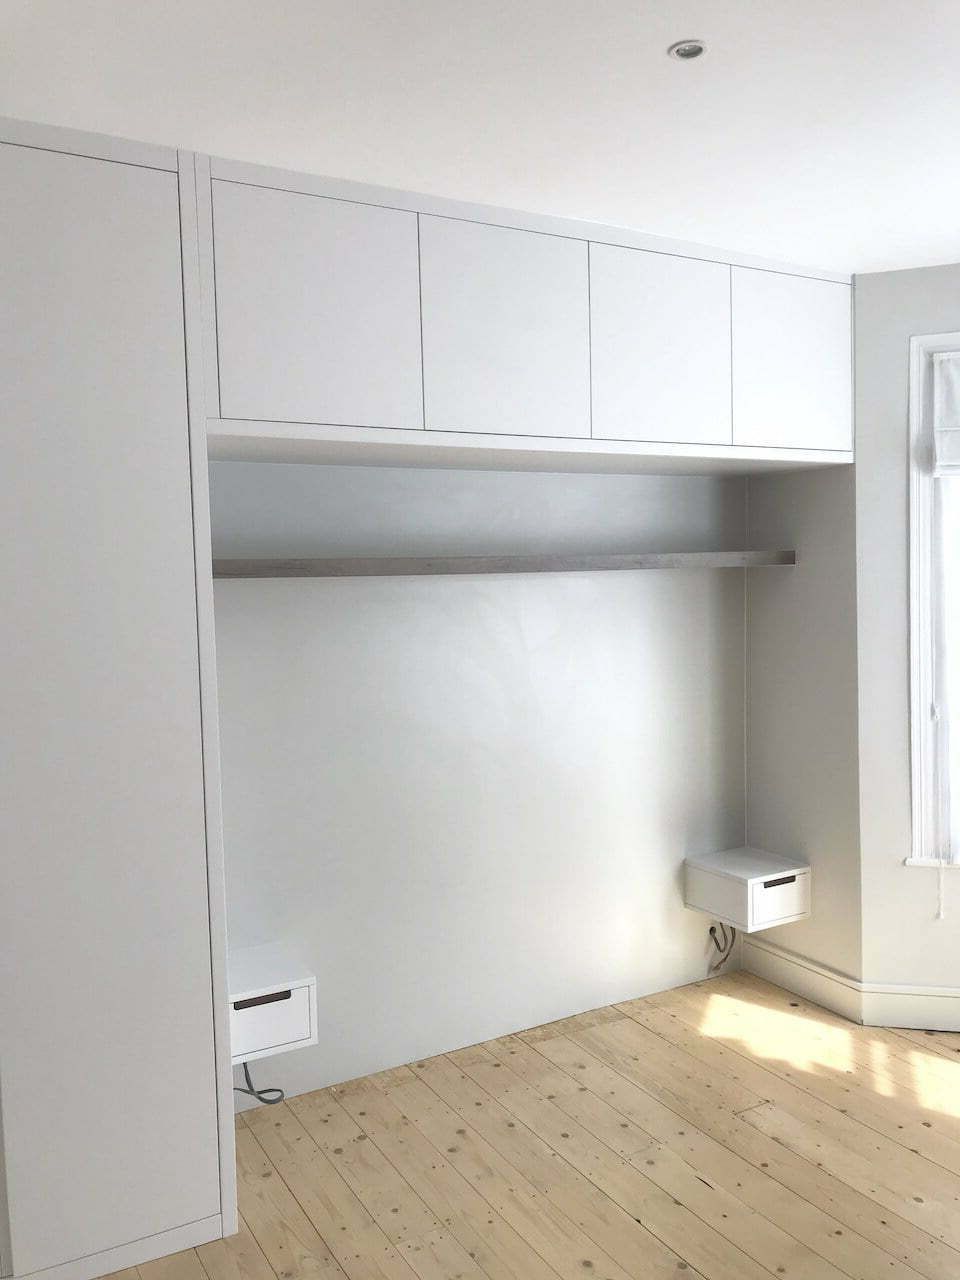 Overbed Fitted Wardrobes And Storage Units, Bespoke Overhead Storage Pertaining To Over Bed Wardrobes Units (View 11 of 20)